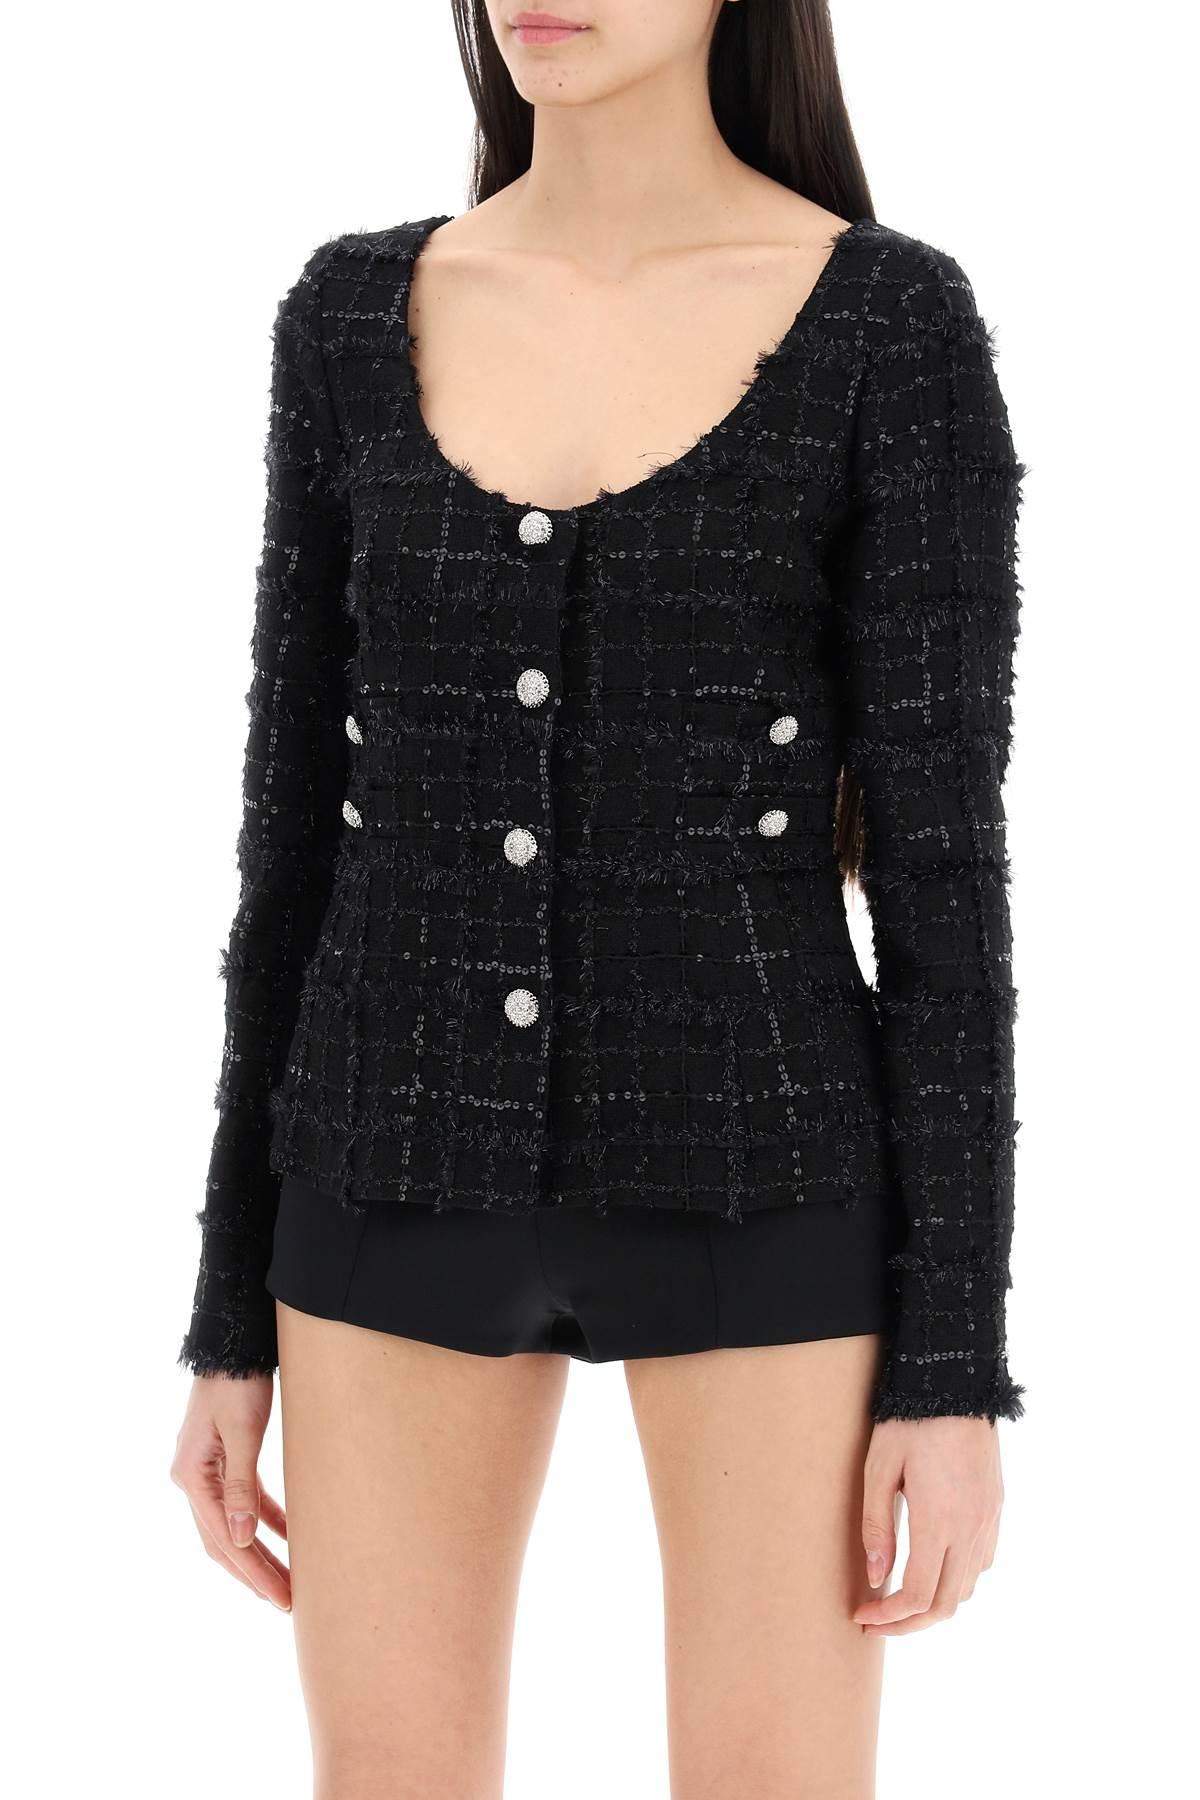 Alessandra Rich Tweed Jacket With Sequins Embell - 5